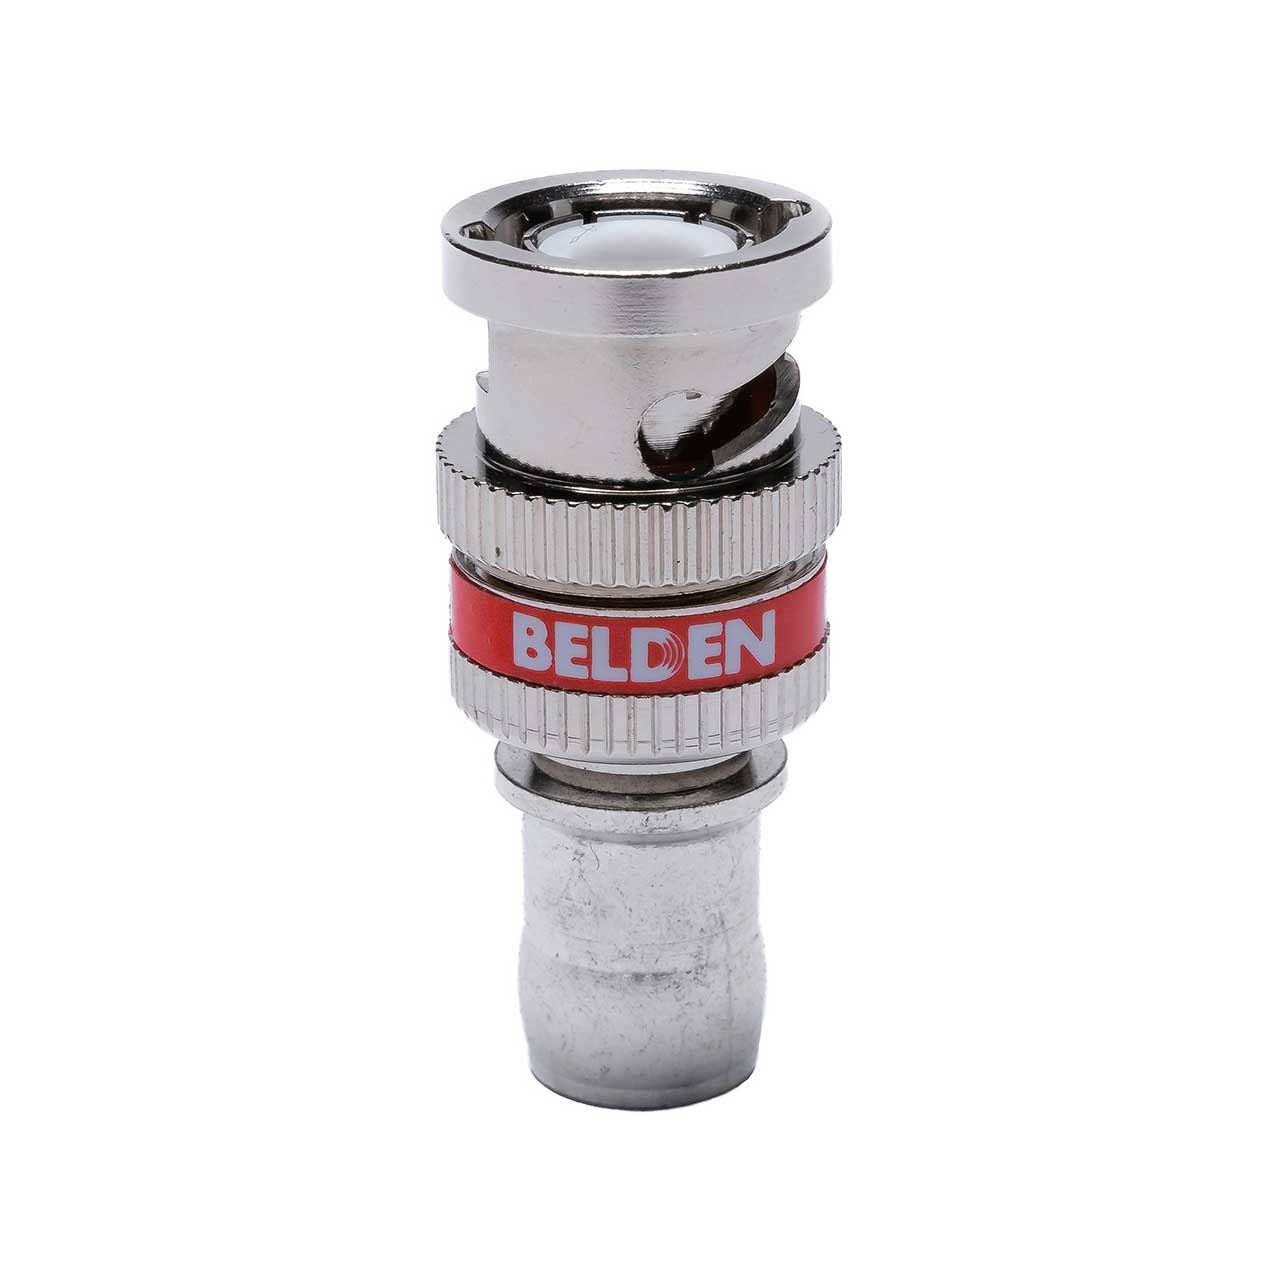 Belden 1505ABHDL 6GHz 1-Piece Locking BNC Compression Connector for  1505A/RG59 Cable Red Band Each